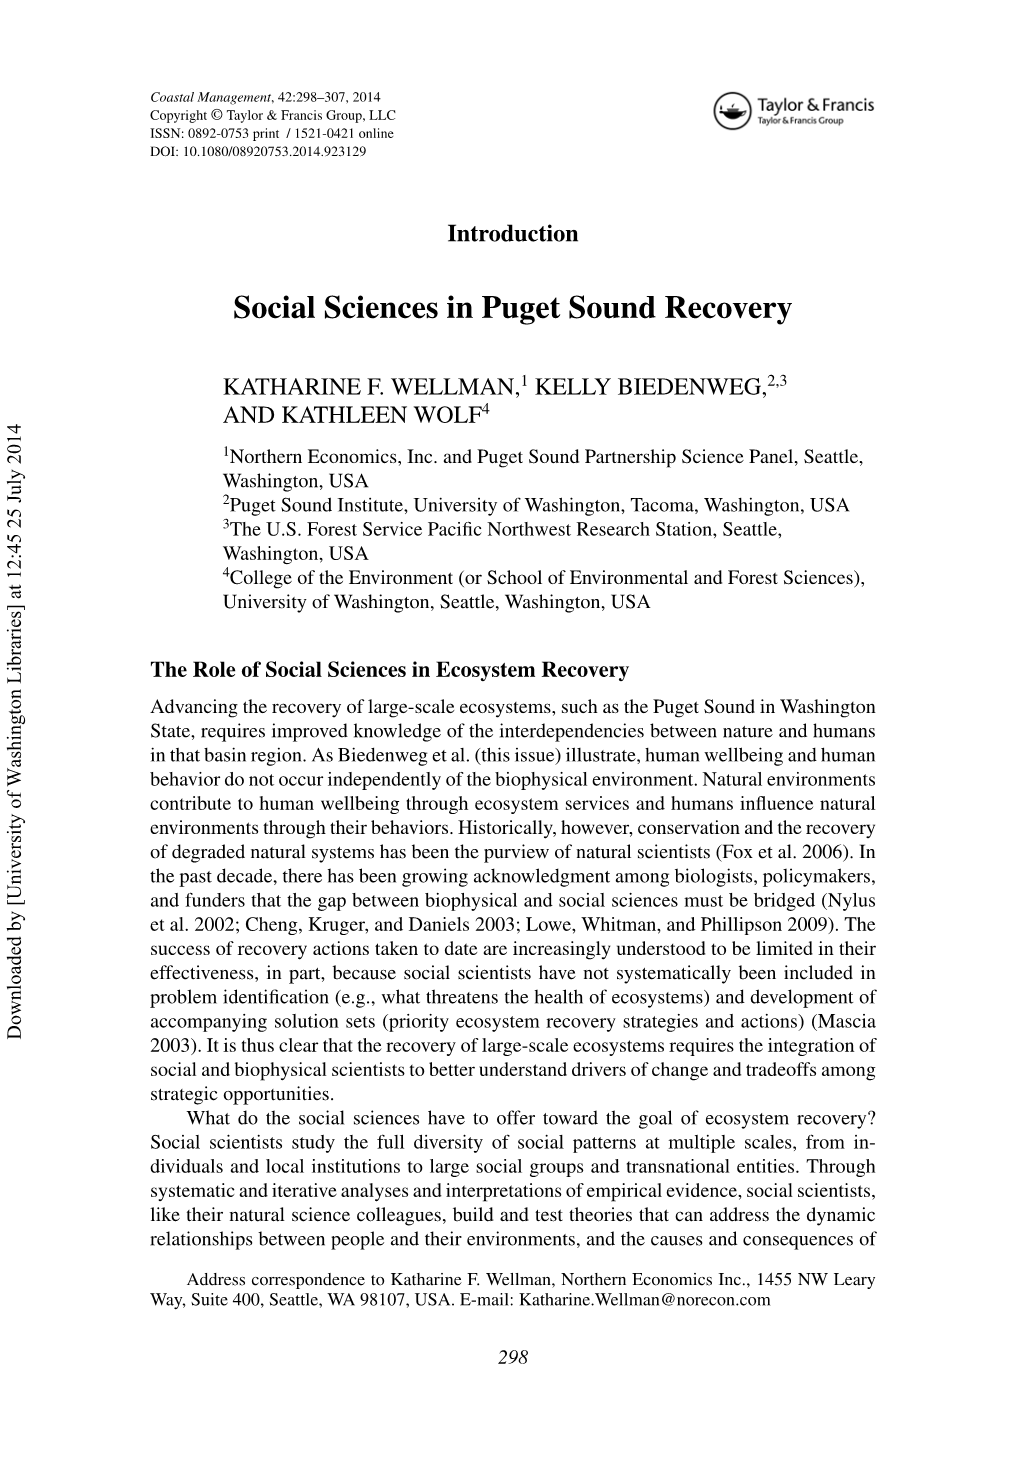 Social Sciences in Puget Sound Recovery